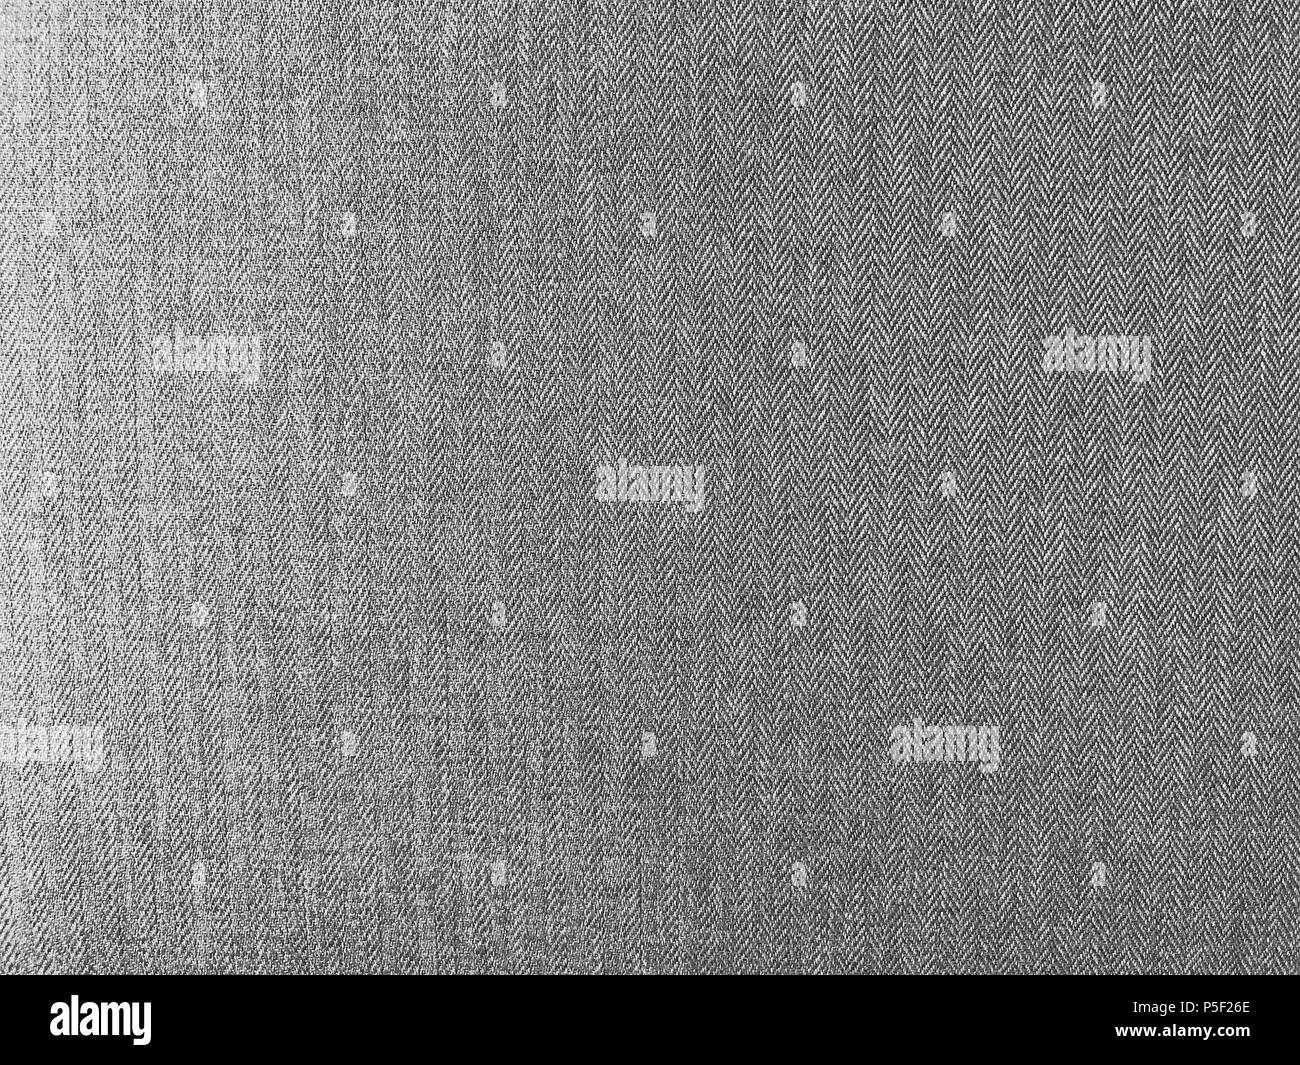 Plastic Fibre Texture High Resolution Stock Photography and Images - Alamy